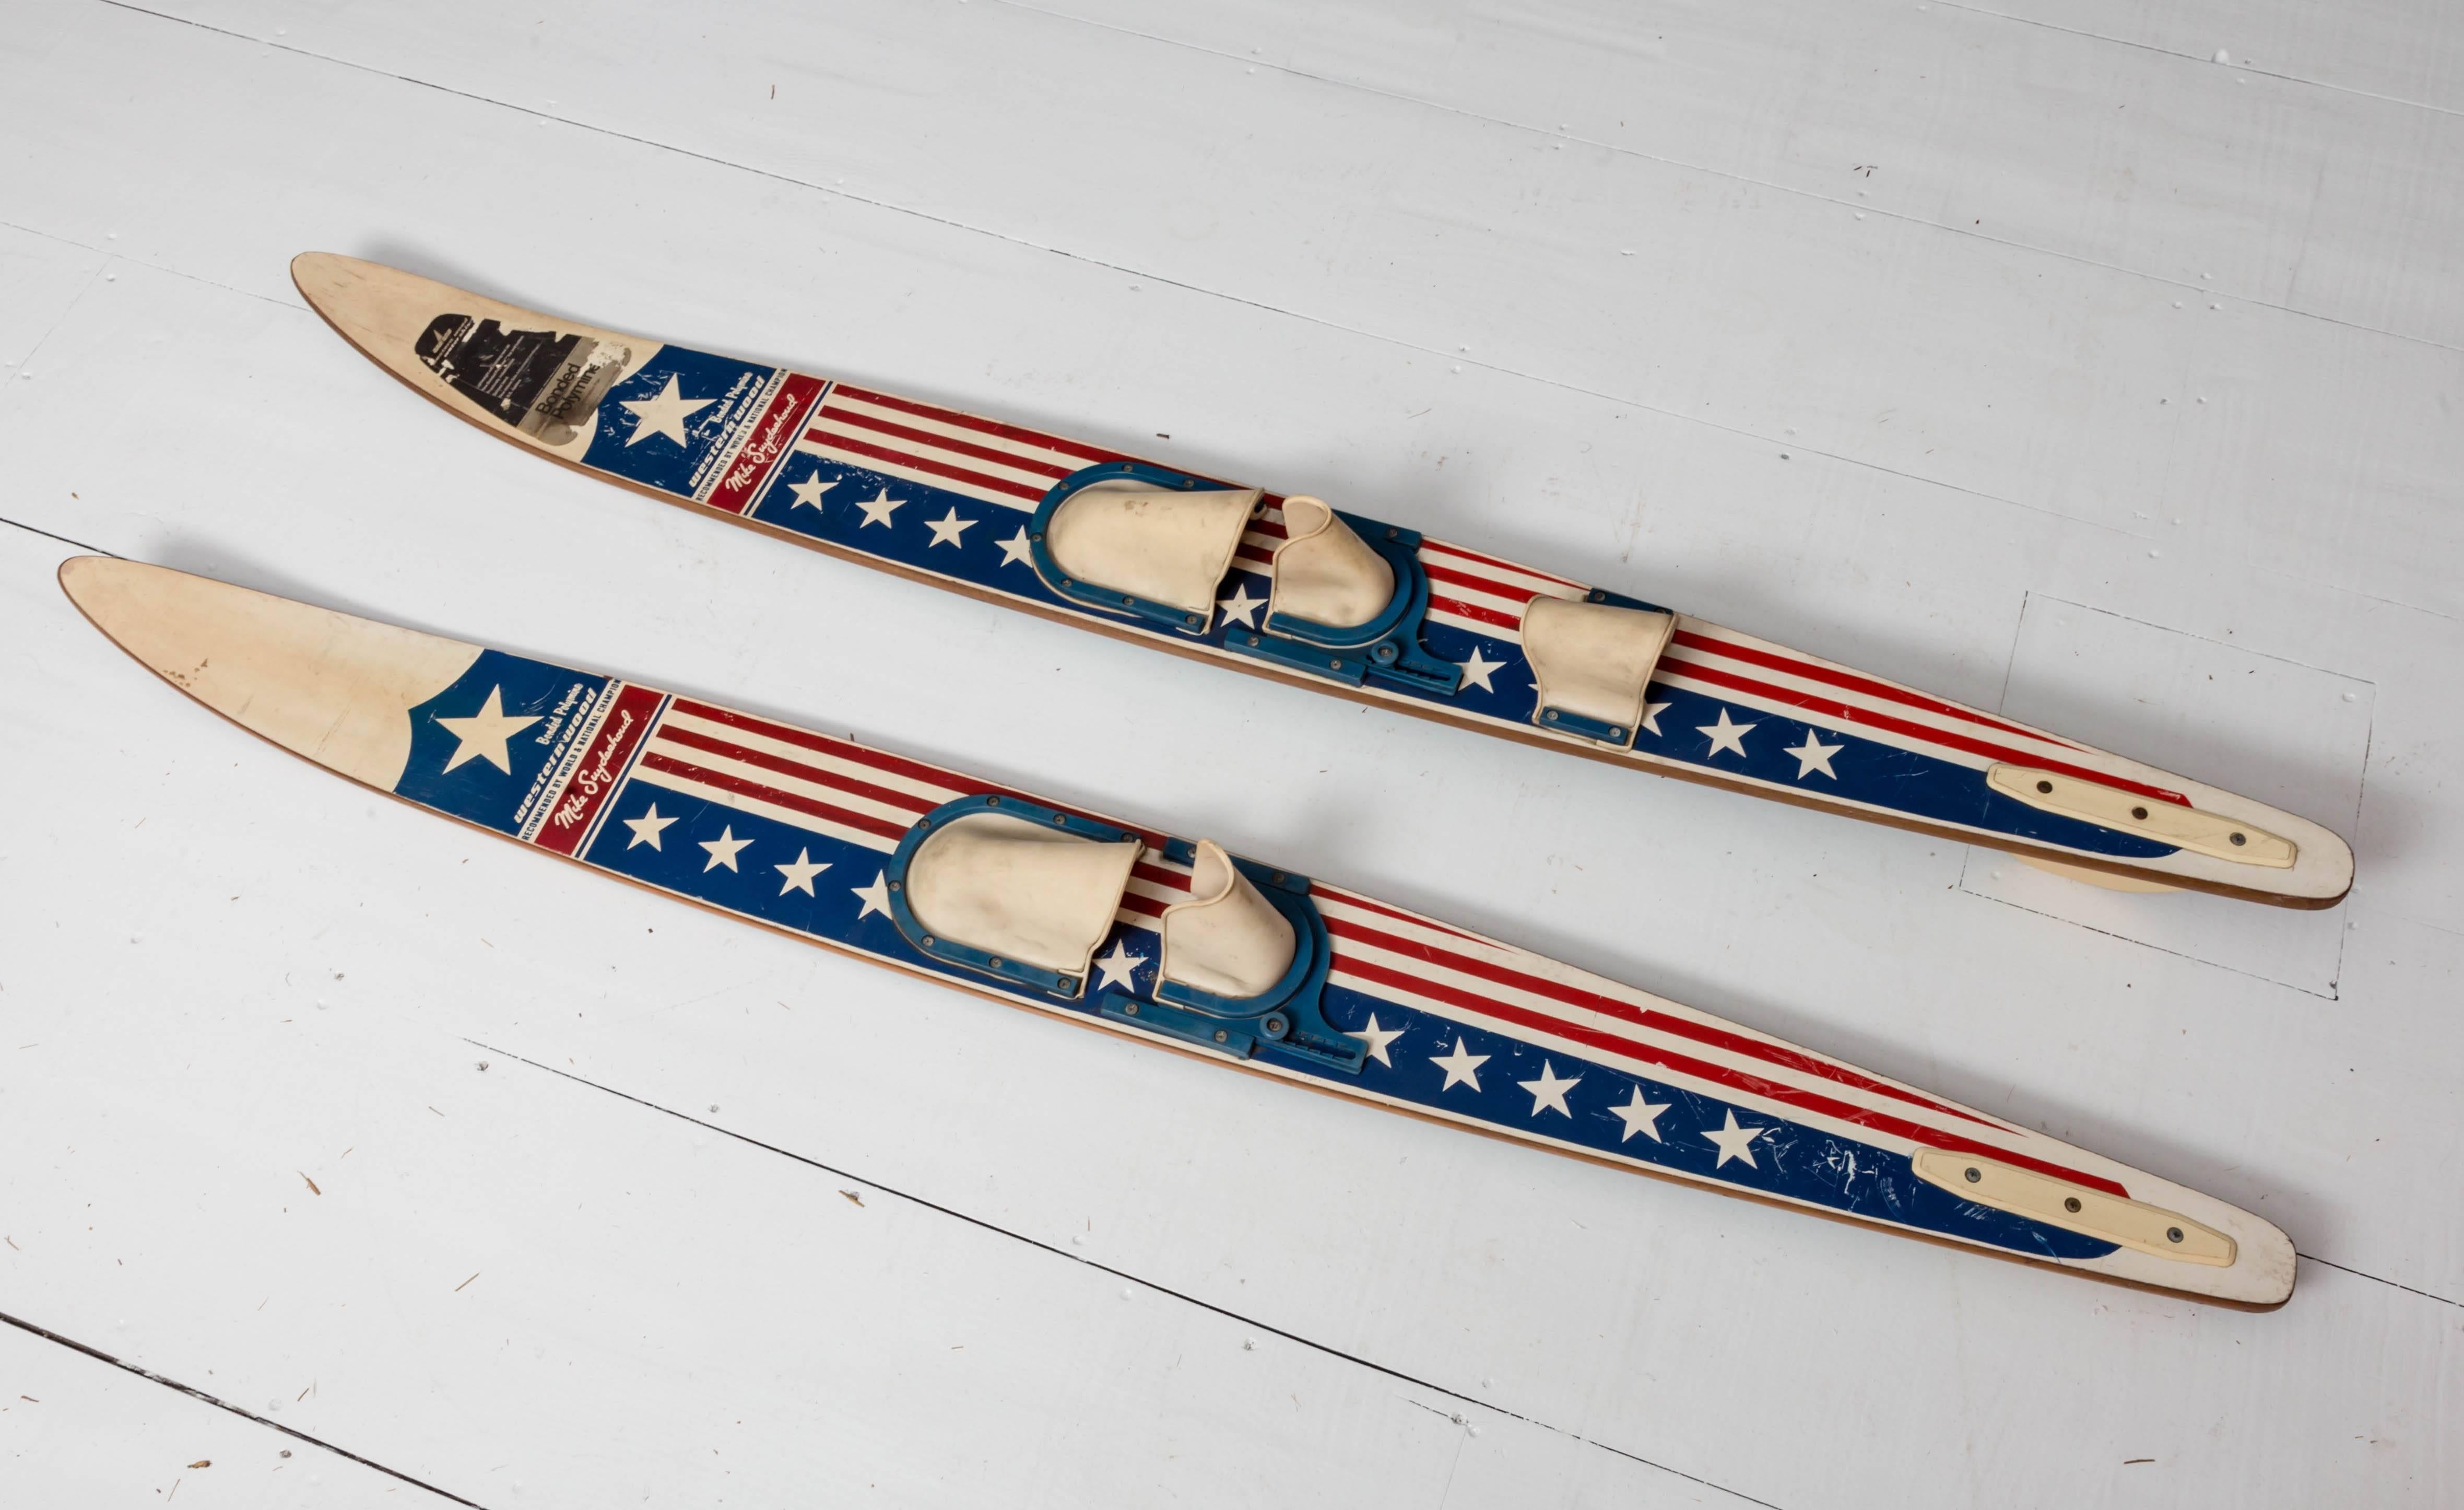 Combination pair of vintage 1970s water skis. Special 'Mike Suyderhoud' edition skis, from his world and national champion reign.

Vintage Americana at it's best!!!